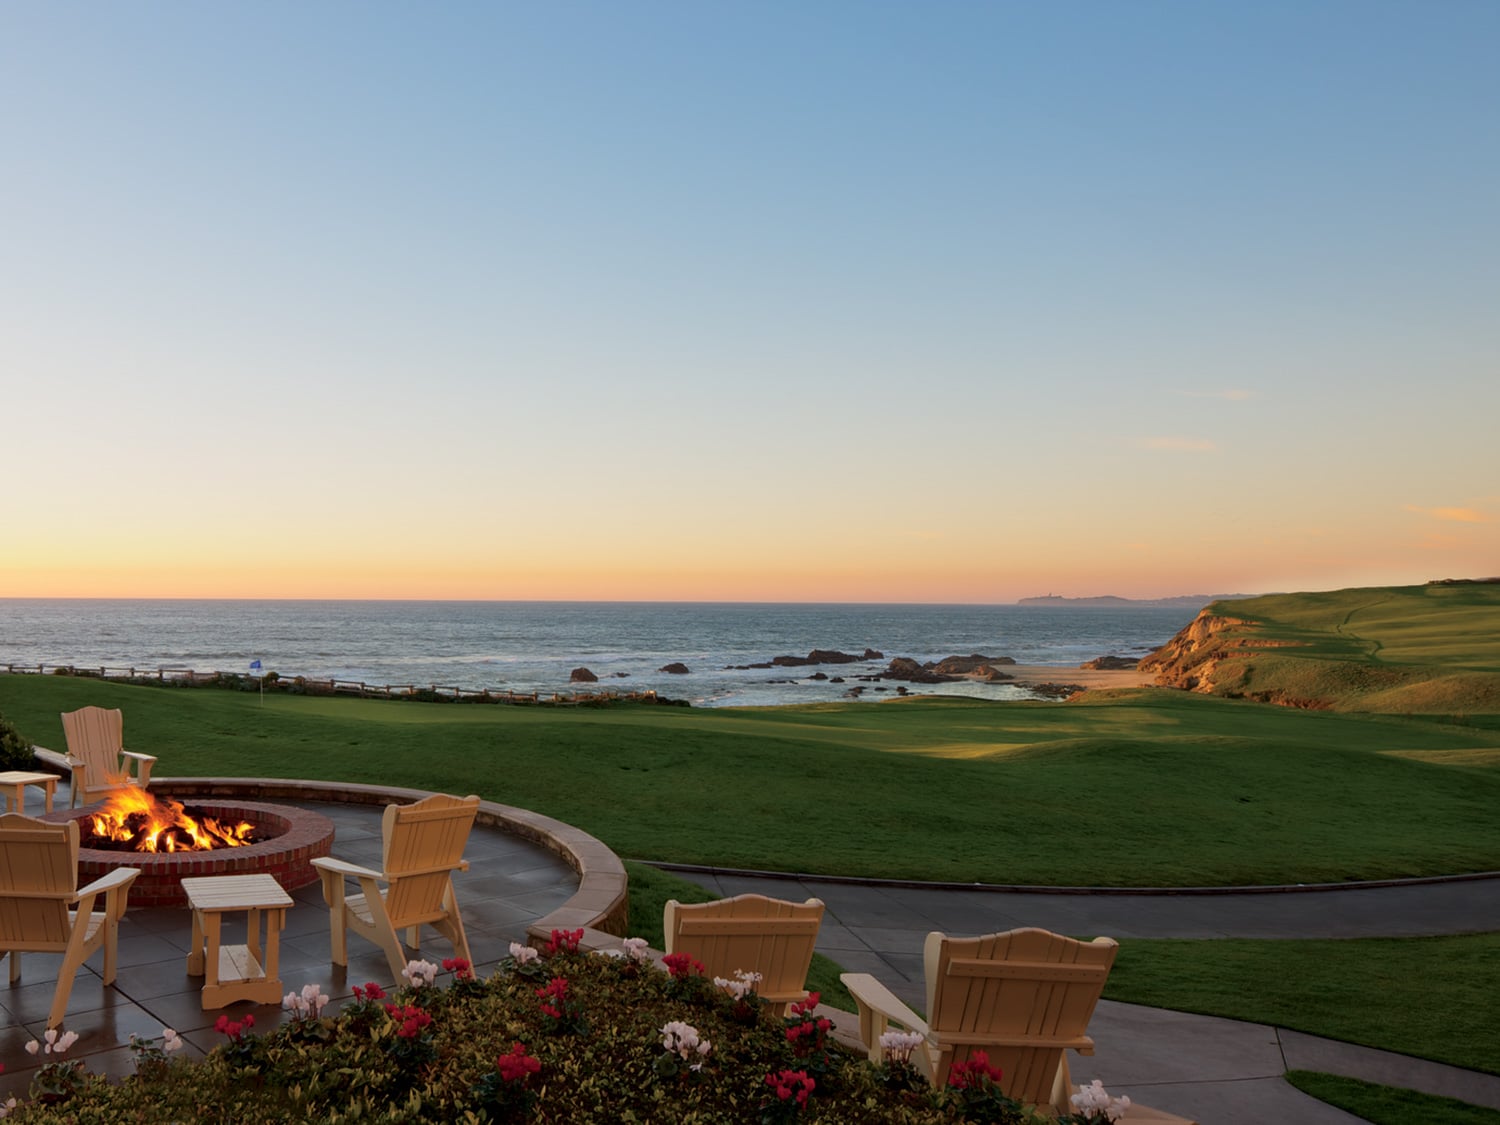 A fire pit view of the sunset from The Ritz-Carlton Half Moon Bay resort in California.